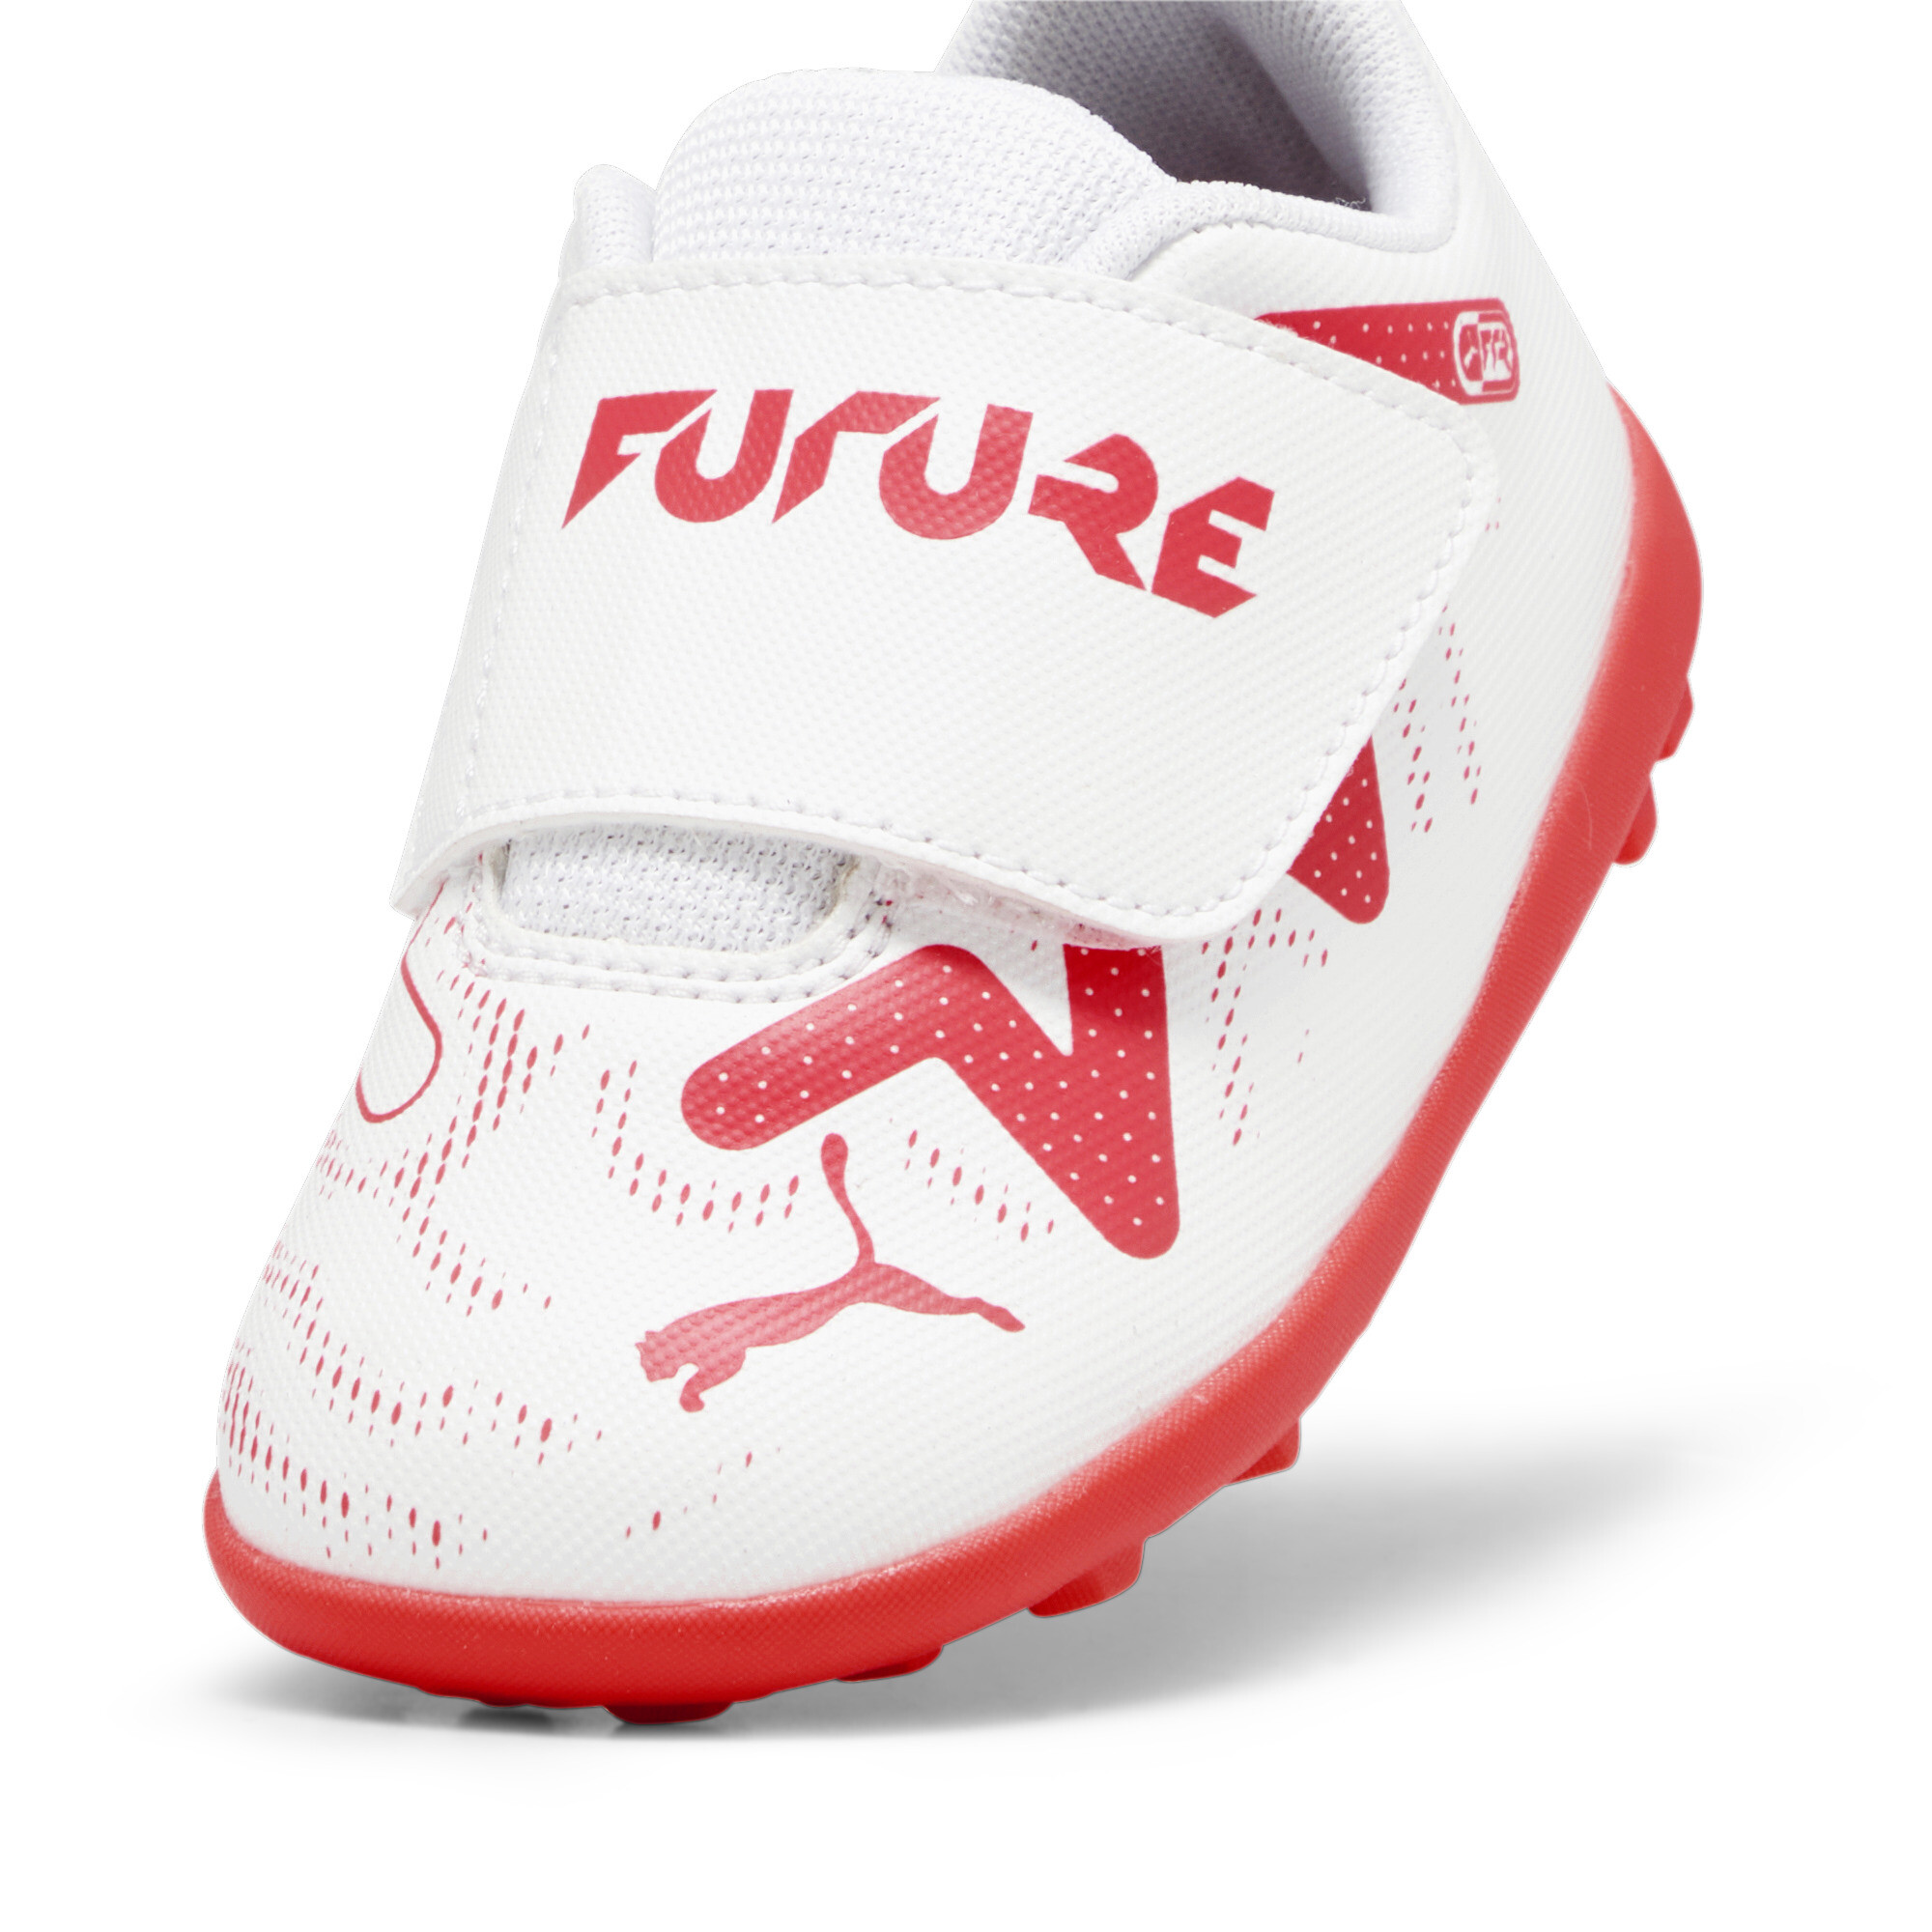 Kids' PUMA FUTURE PLAY TT Toddlers' Football Boots In White, Size EU 23